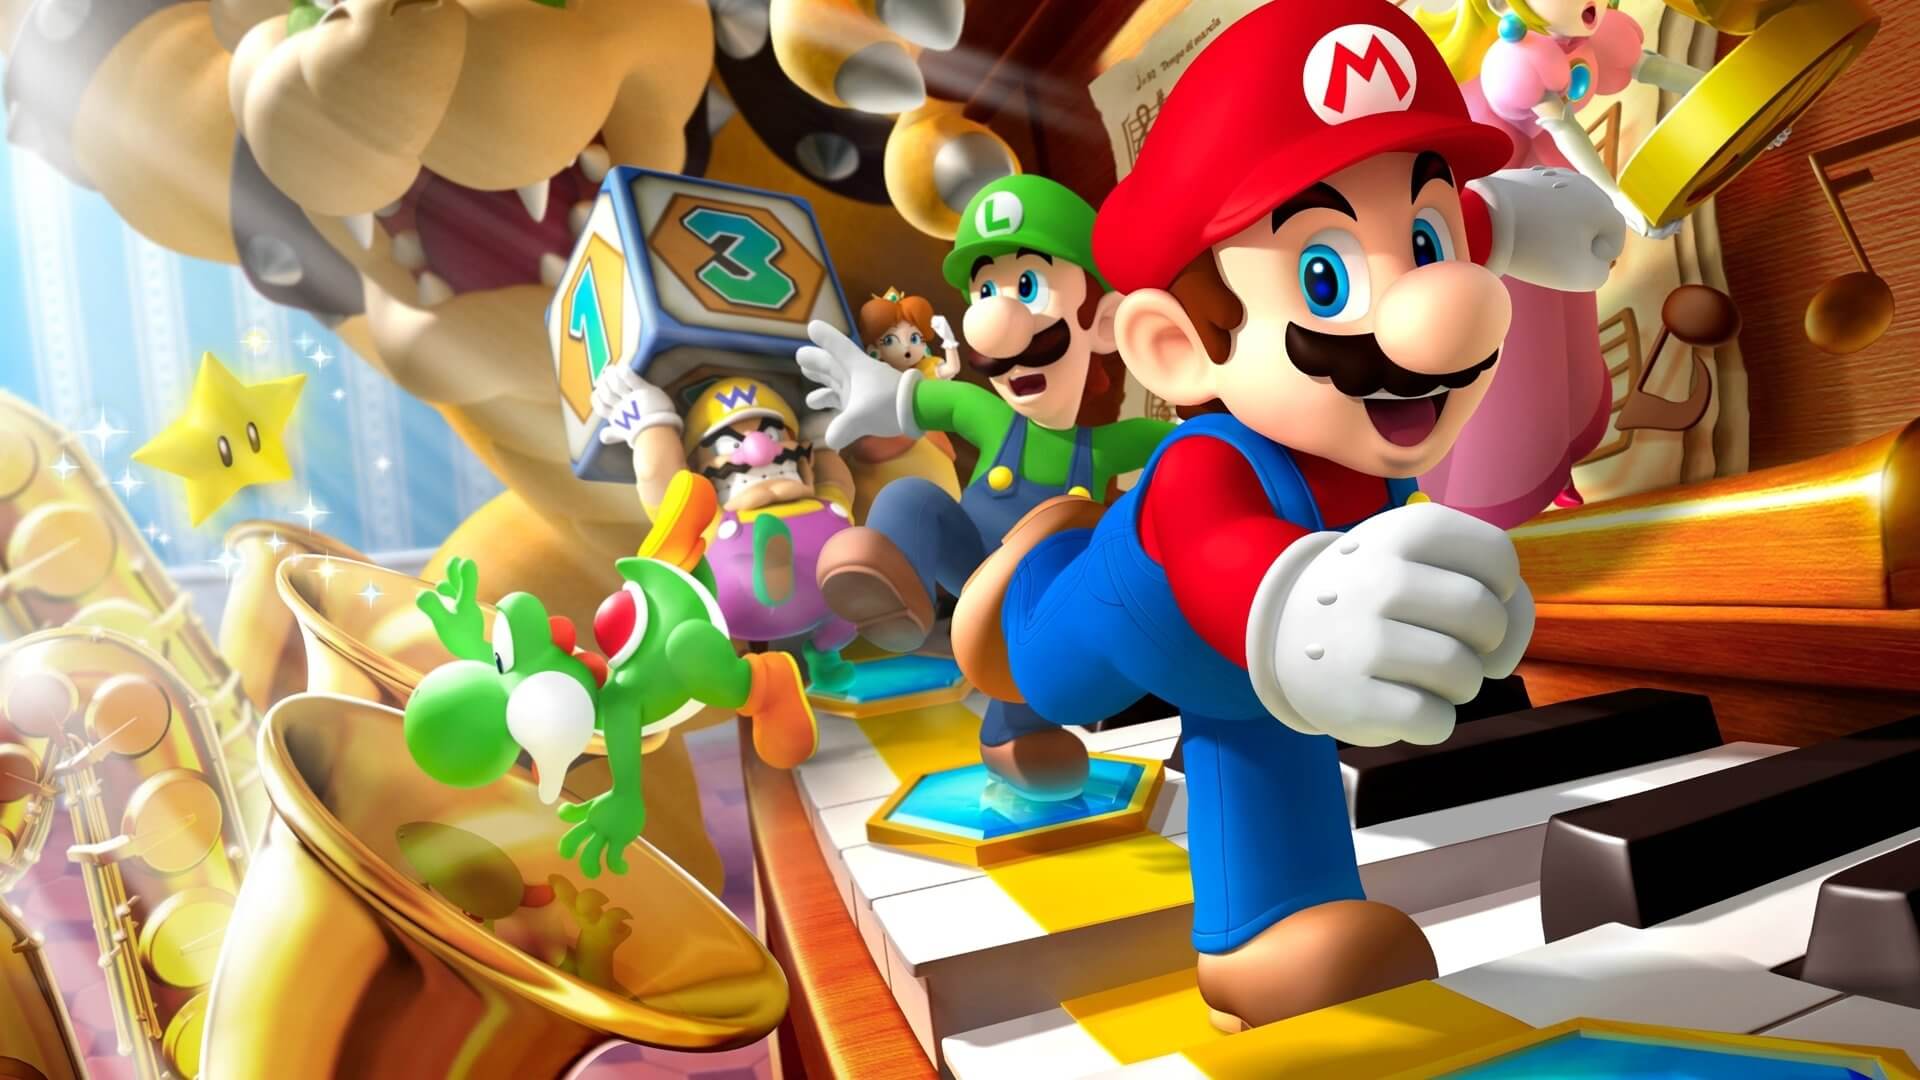 Nintendo is canceling its participation in Gamescom this year